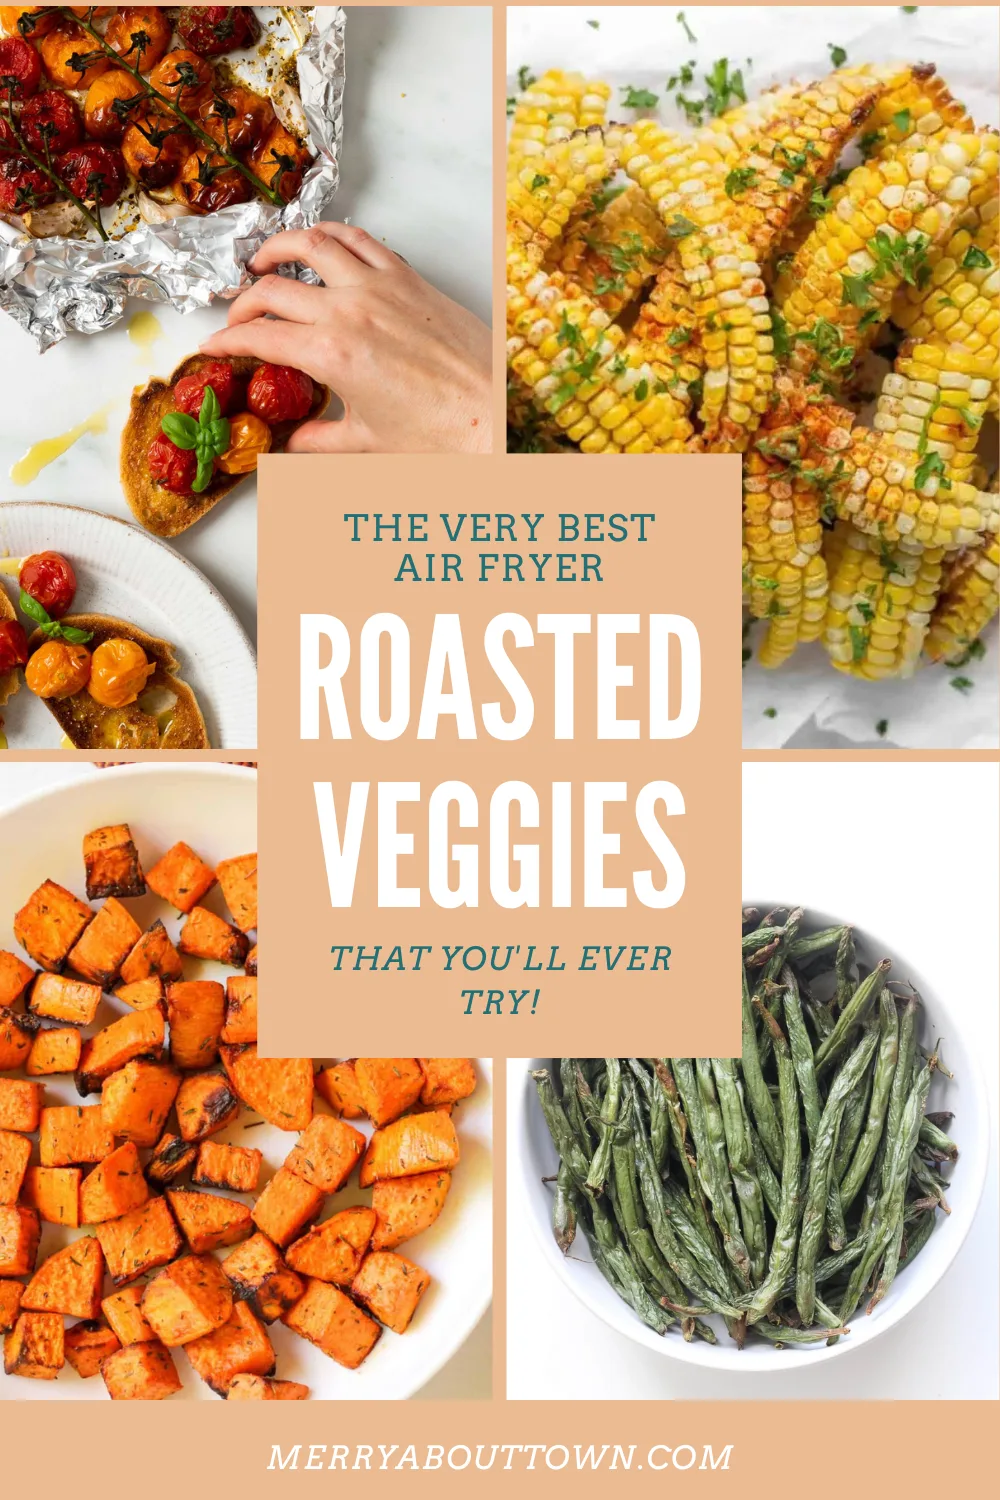 Give your side vegetables the “oomph” that they deserve. Check out these mouthwatering recipes for air fryer roasted vegetables. We’ve got tons of ideas from the best bloggers on the web.